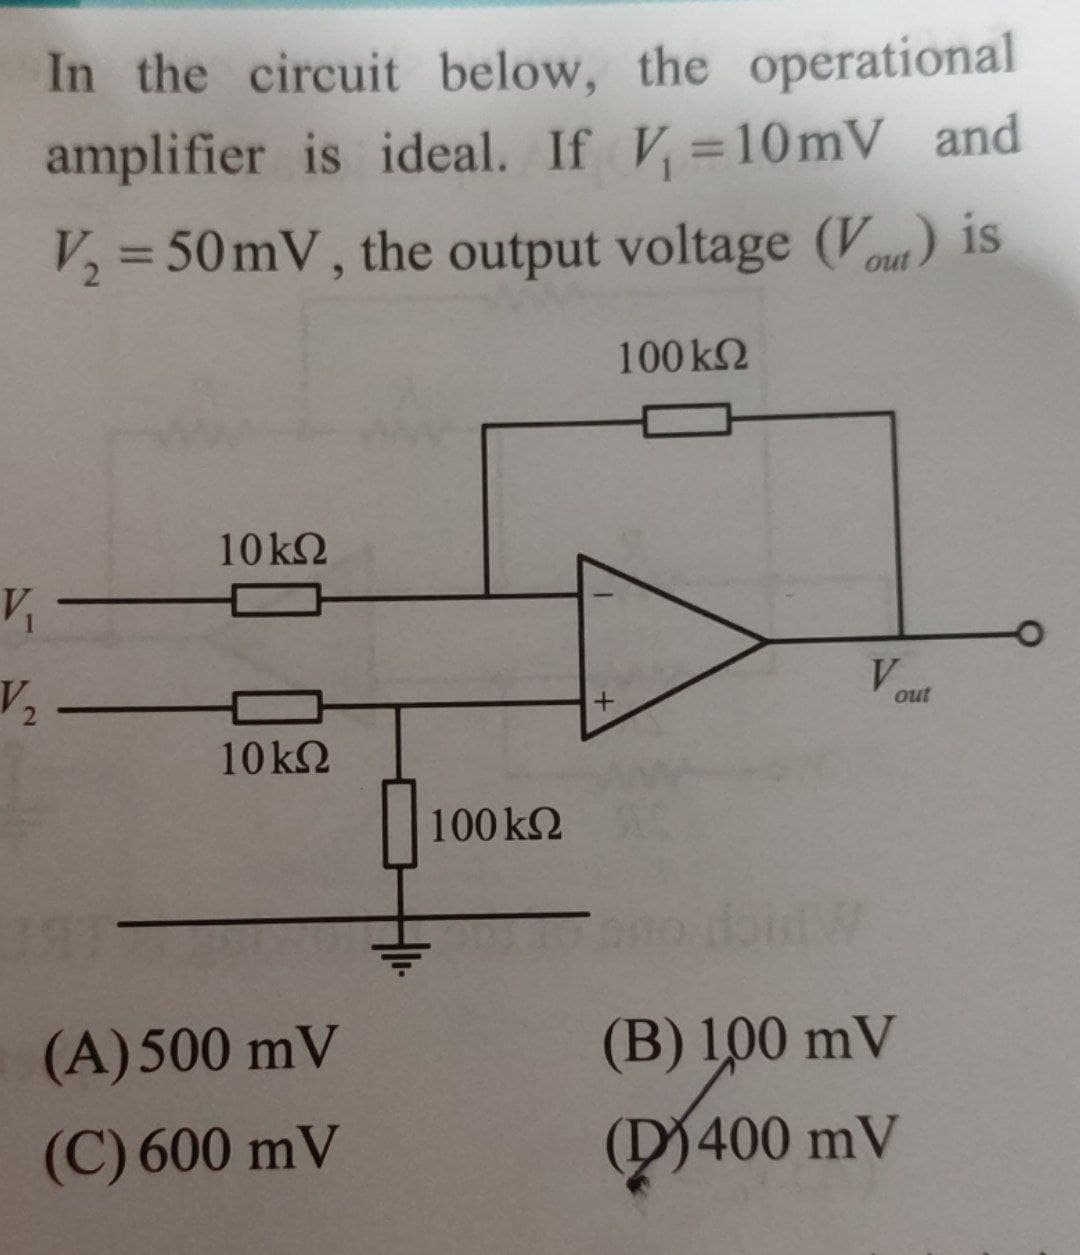 In the circuit below, the operational
amplifier is ideal. If V₁=10mV and
V₂ = 50 mV, the output voltage (Vout) is
100 ΚΩ
V₁
V₂
10 ΚΩ
10kQ
(A) 500 mV
(C) 600 mV
100 ΚΩ
V
out
(B) 100 mV
400 mV
(400